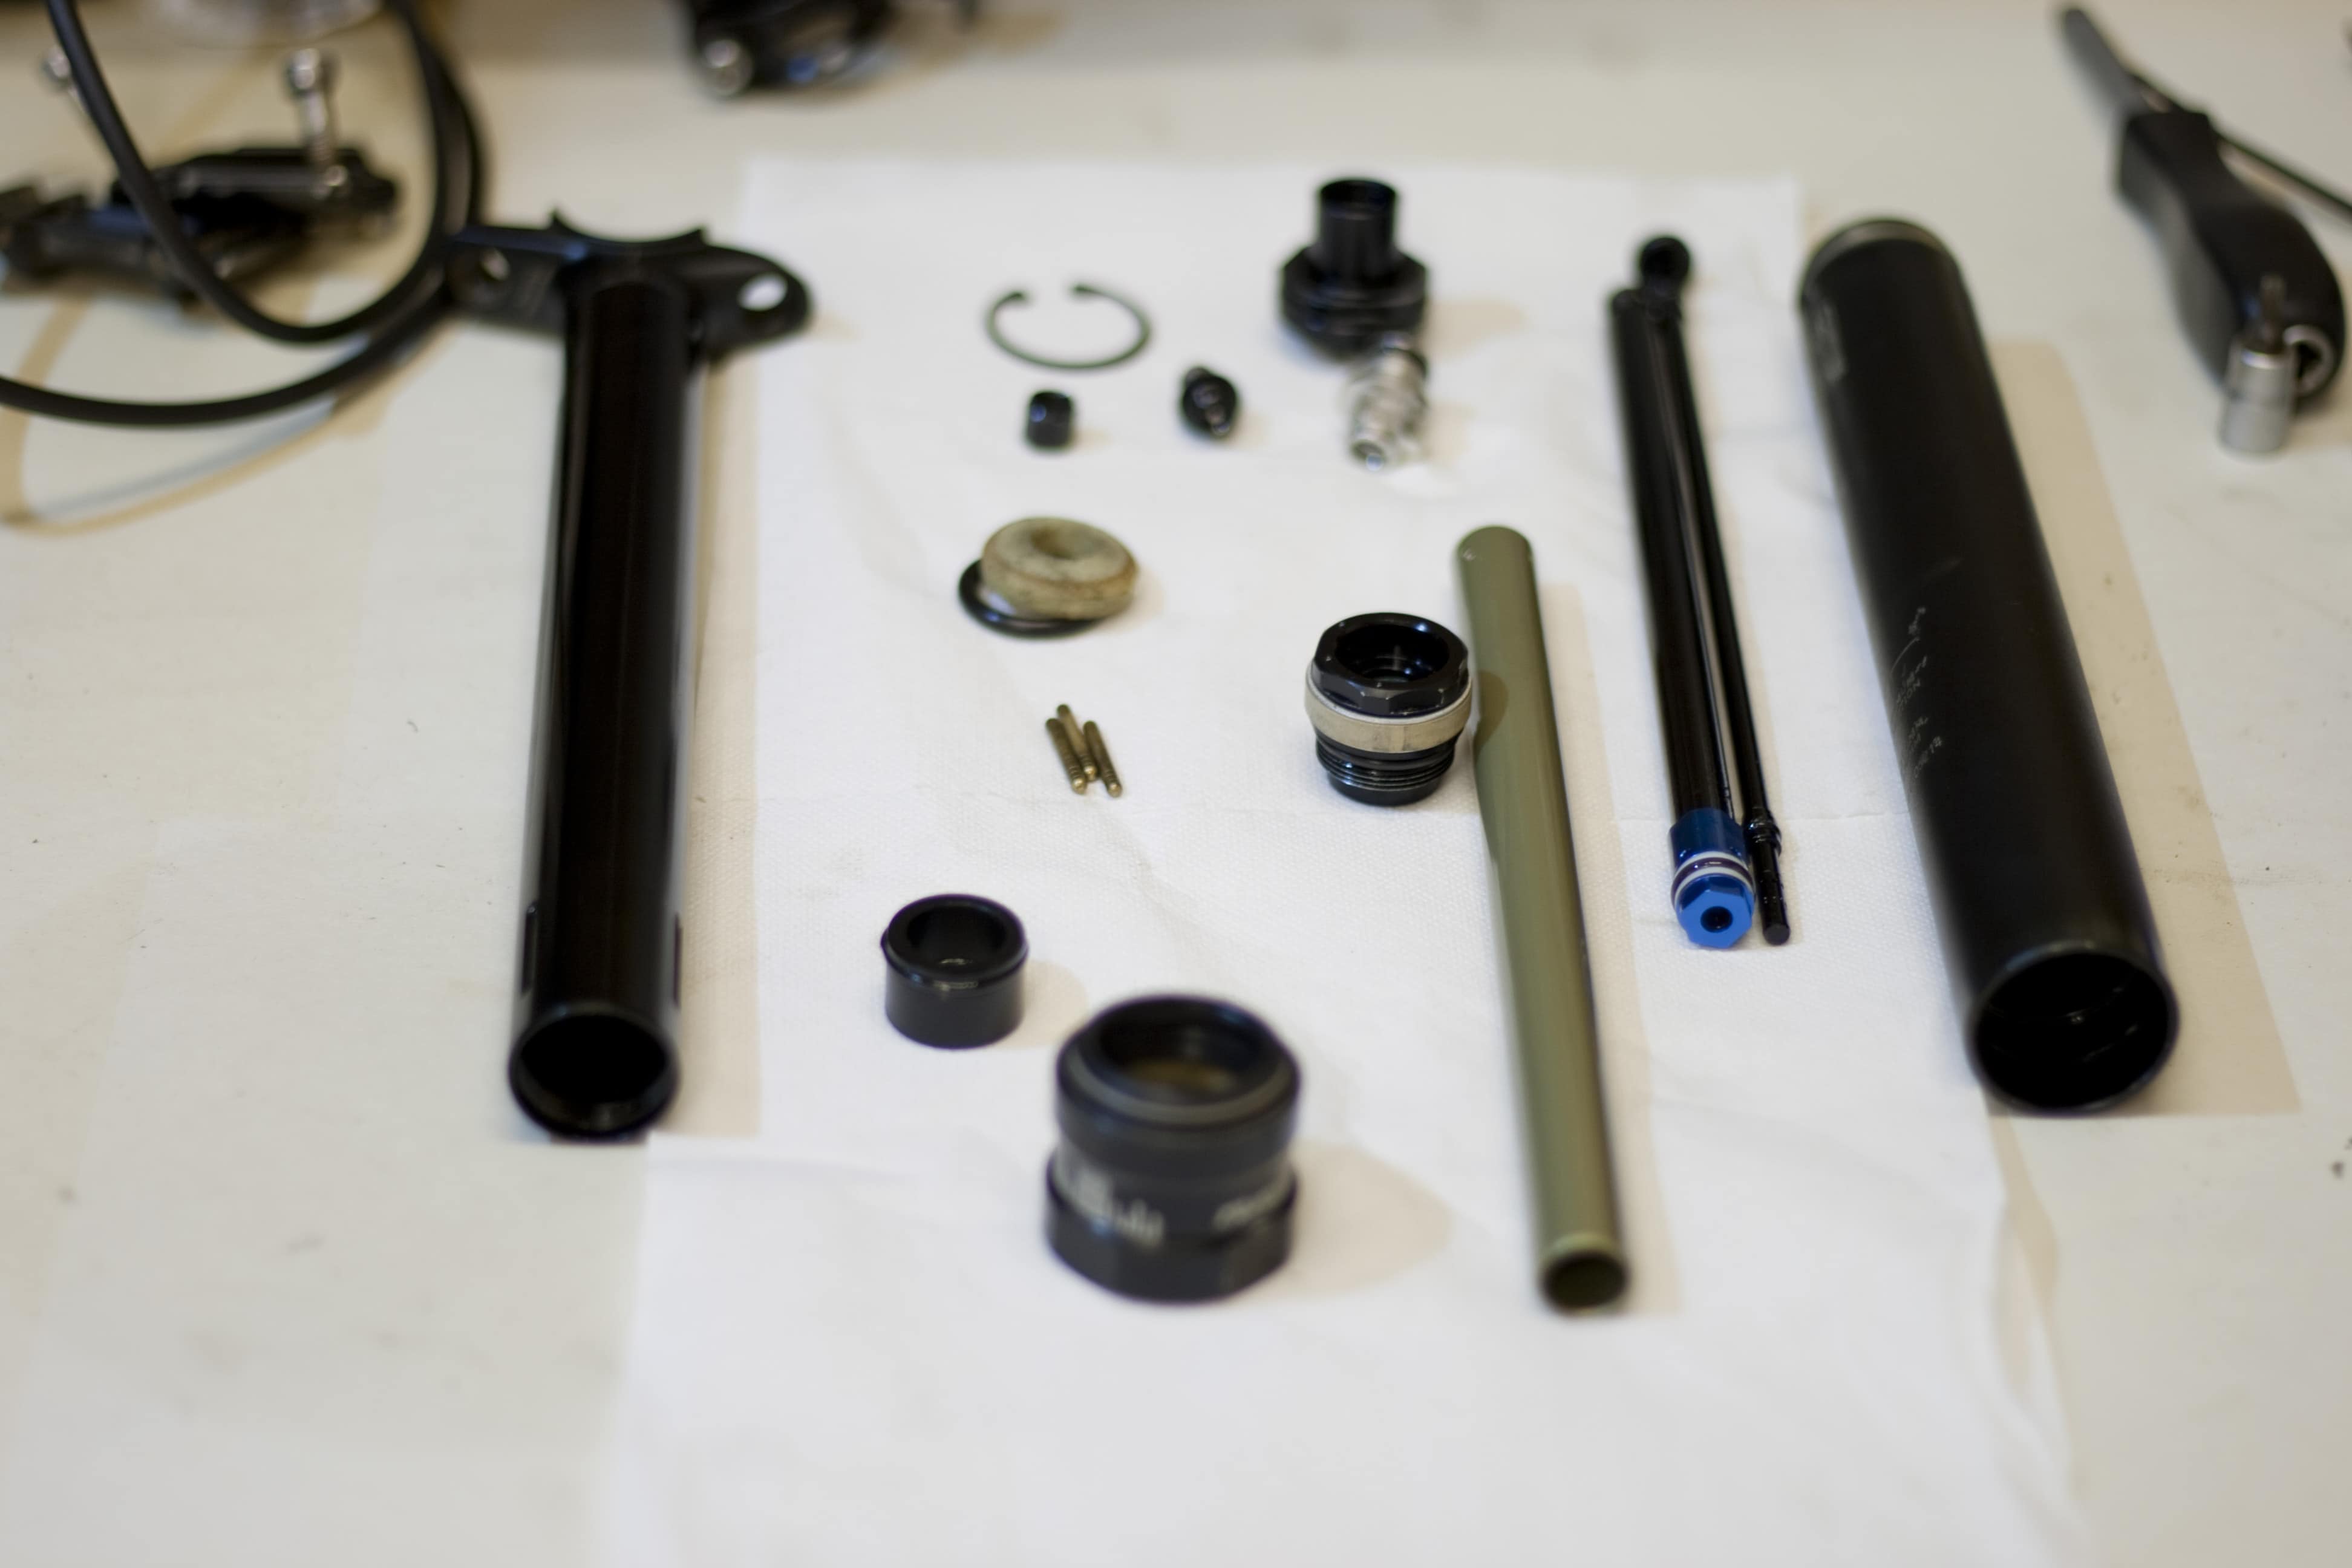 RockShox Reverb Stealth a2 b1 seatpost Seal kit service upgraded & improved